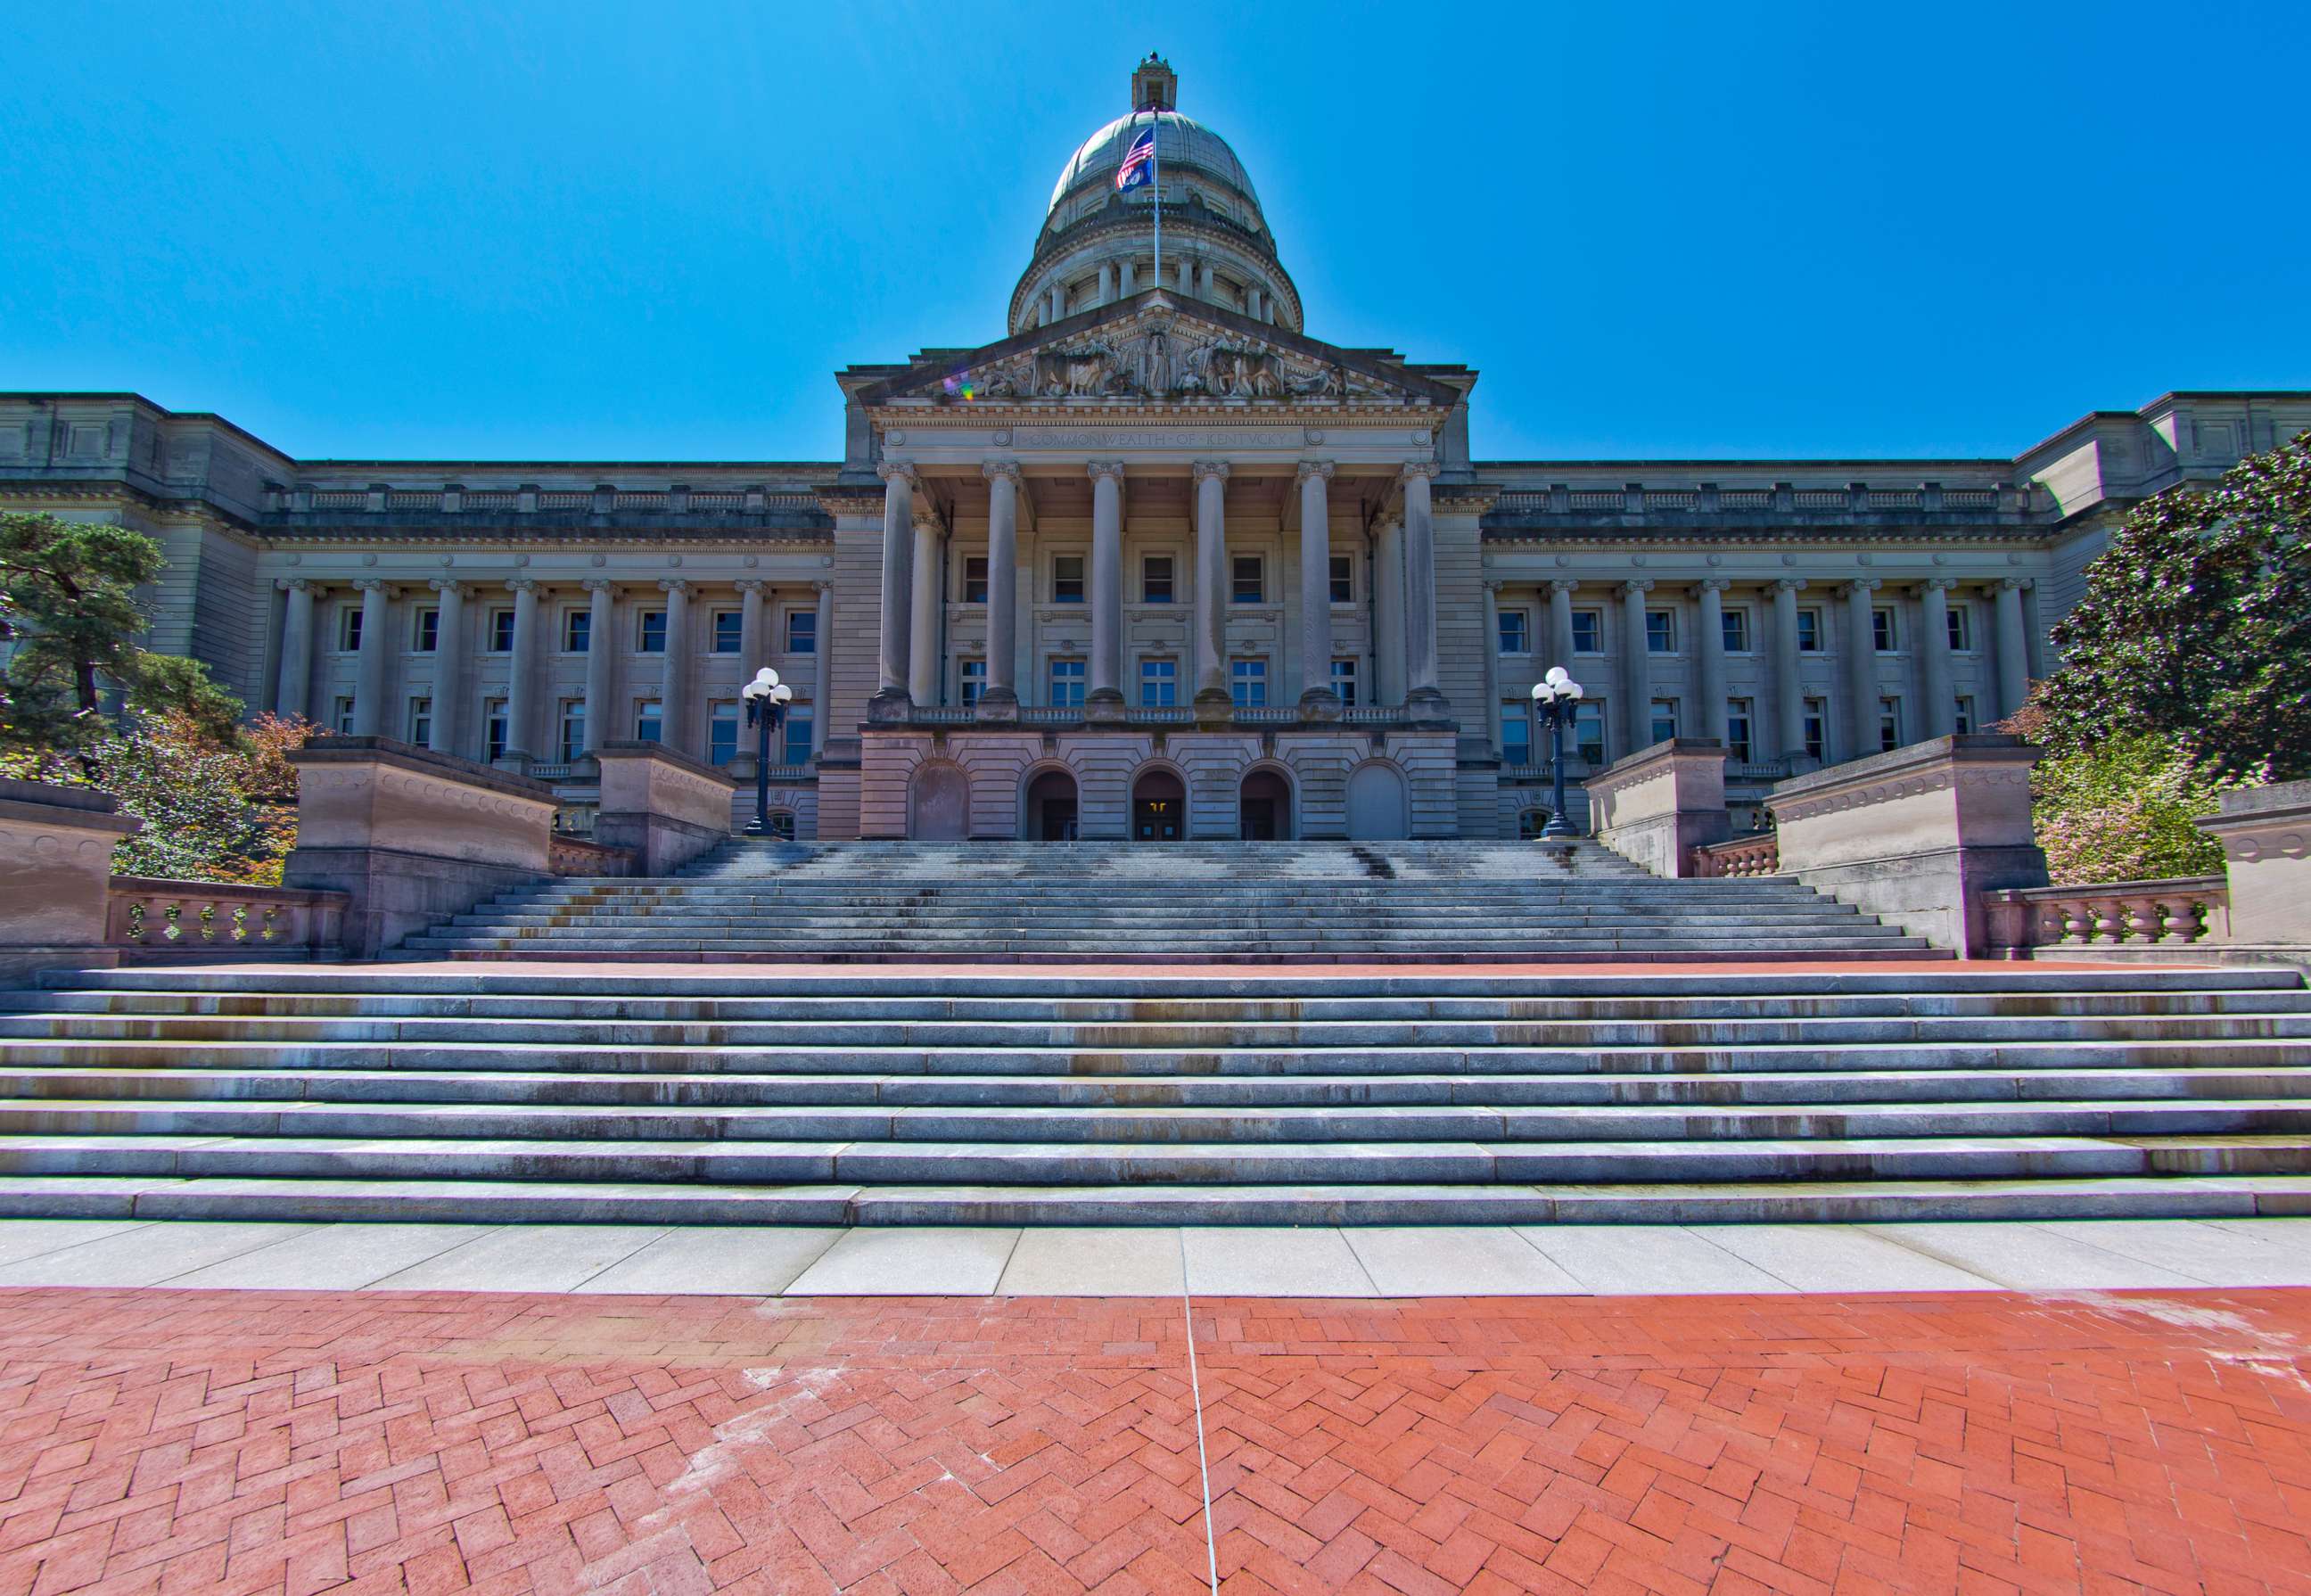 PHOTO: The Kentucky State Capitol in Frankfort, Ky. is pictured in this undated stock photo.